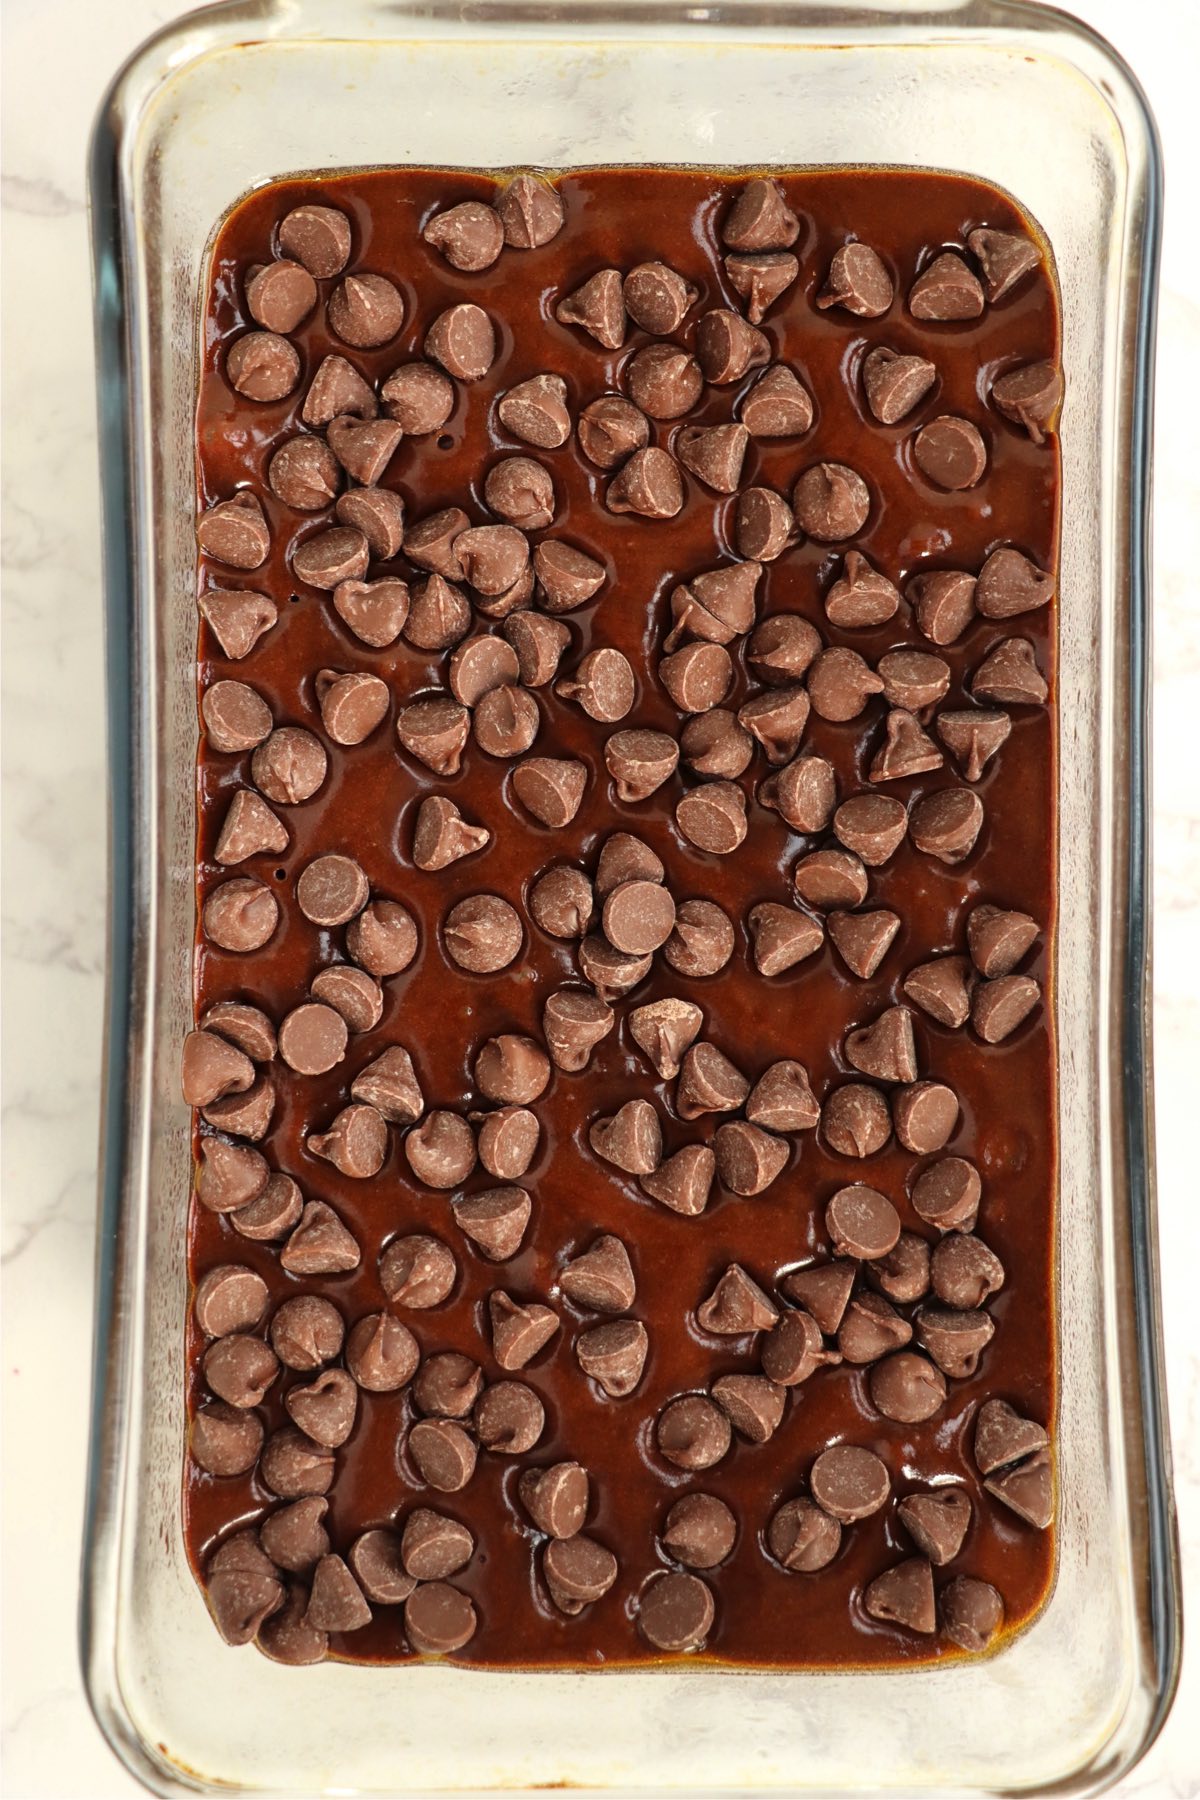 Chocolate chips sprinkled on top of brownie batter in glass loaf pan